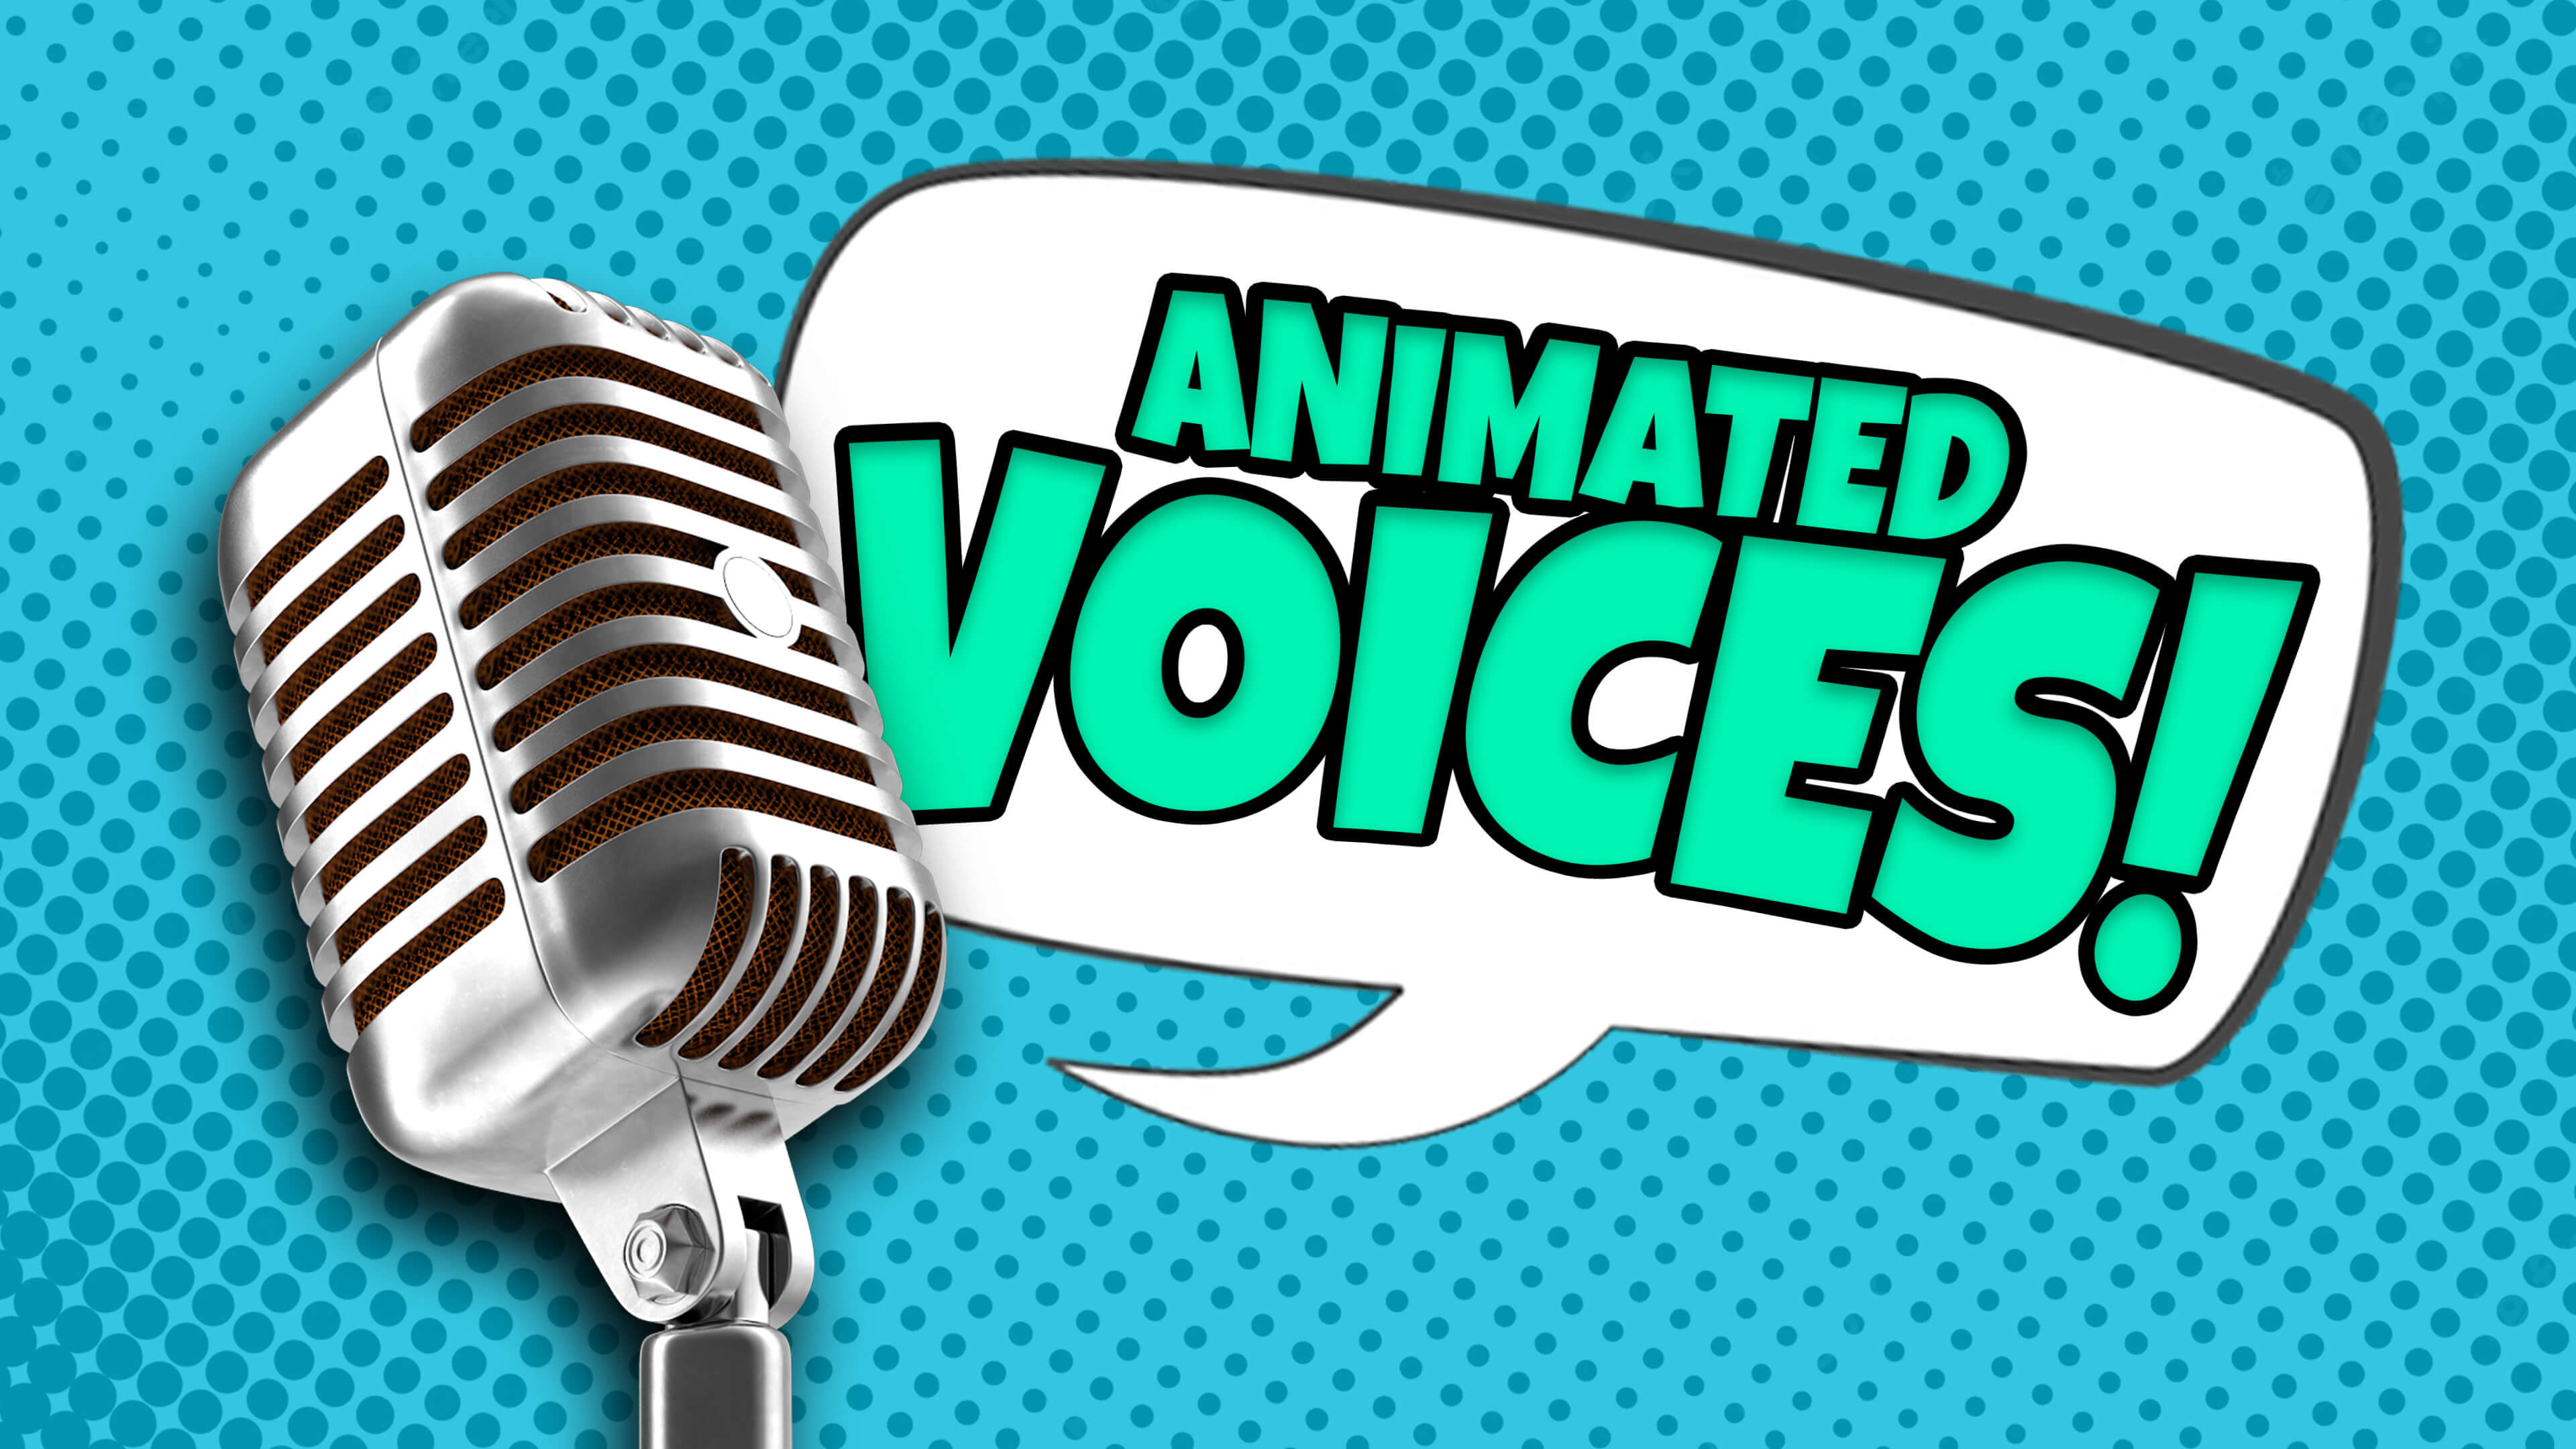 Animated Voices